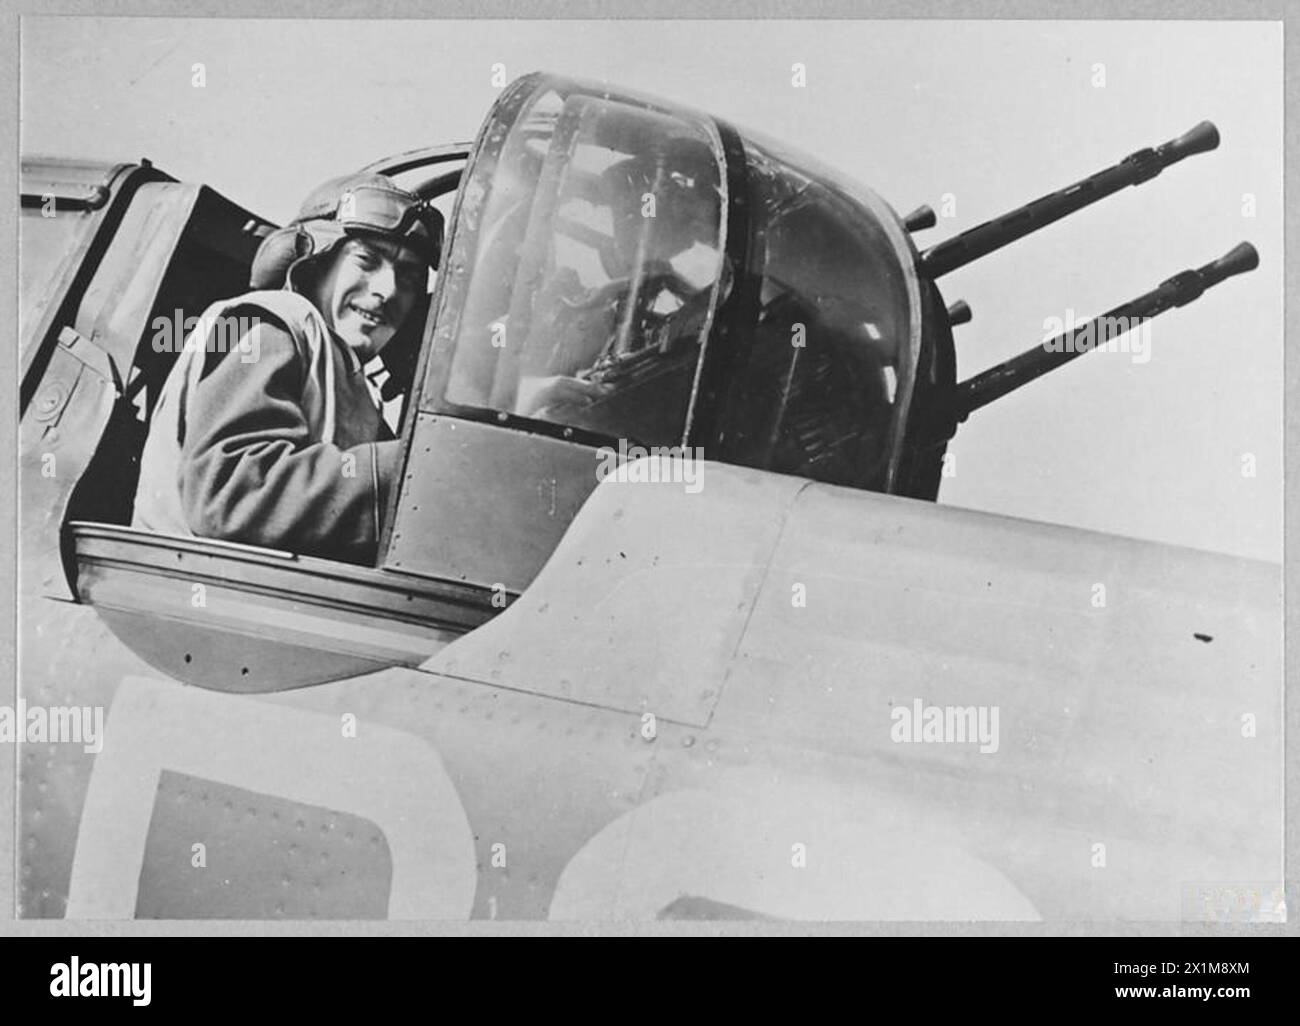 THE BATTLE OF BRITAIN 1940 - An air gunner in the turret of a Boulton Paul Defiant of No. 264 Squadron at Kirton in Lindsey, August 1940, Royal Air Force Stock Photo